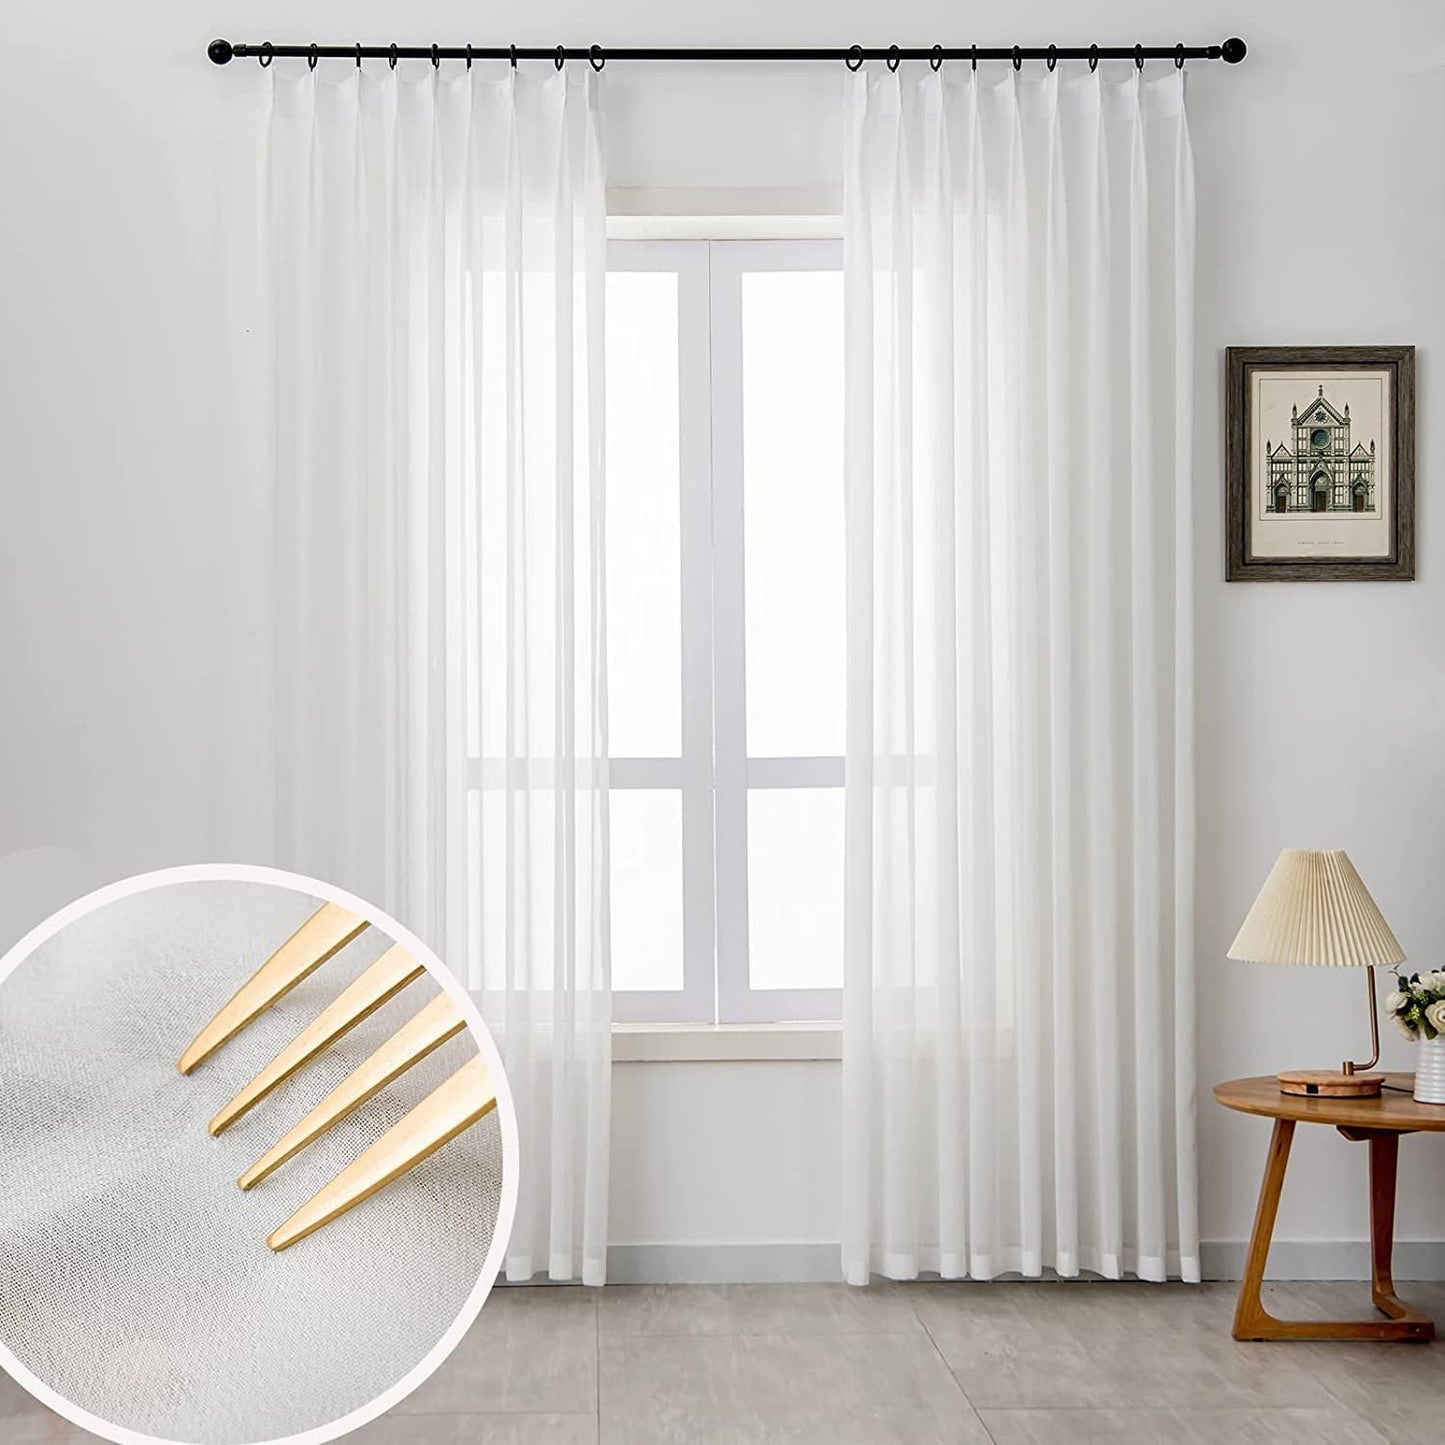 LUGOTAL Pinch Pleated Drapes 108 Inches Long 1 Panel off White Chiffon Sheer Curtains for Living Room and Bedroom Semi-Sheer Light Filtering Curtains & Drapes for Sliding Glass Door, W52 X L108  LUGOTAL Off White (W52" X L63")*1 Panel 